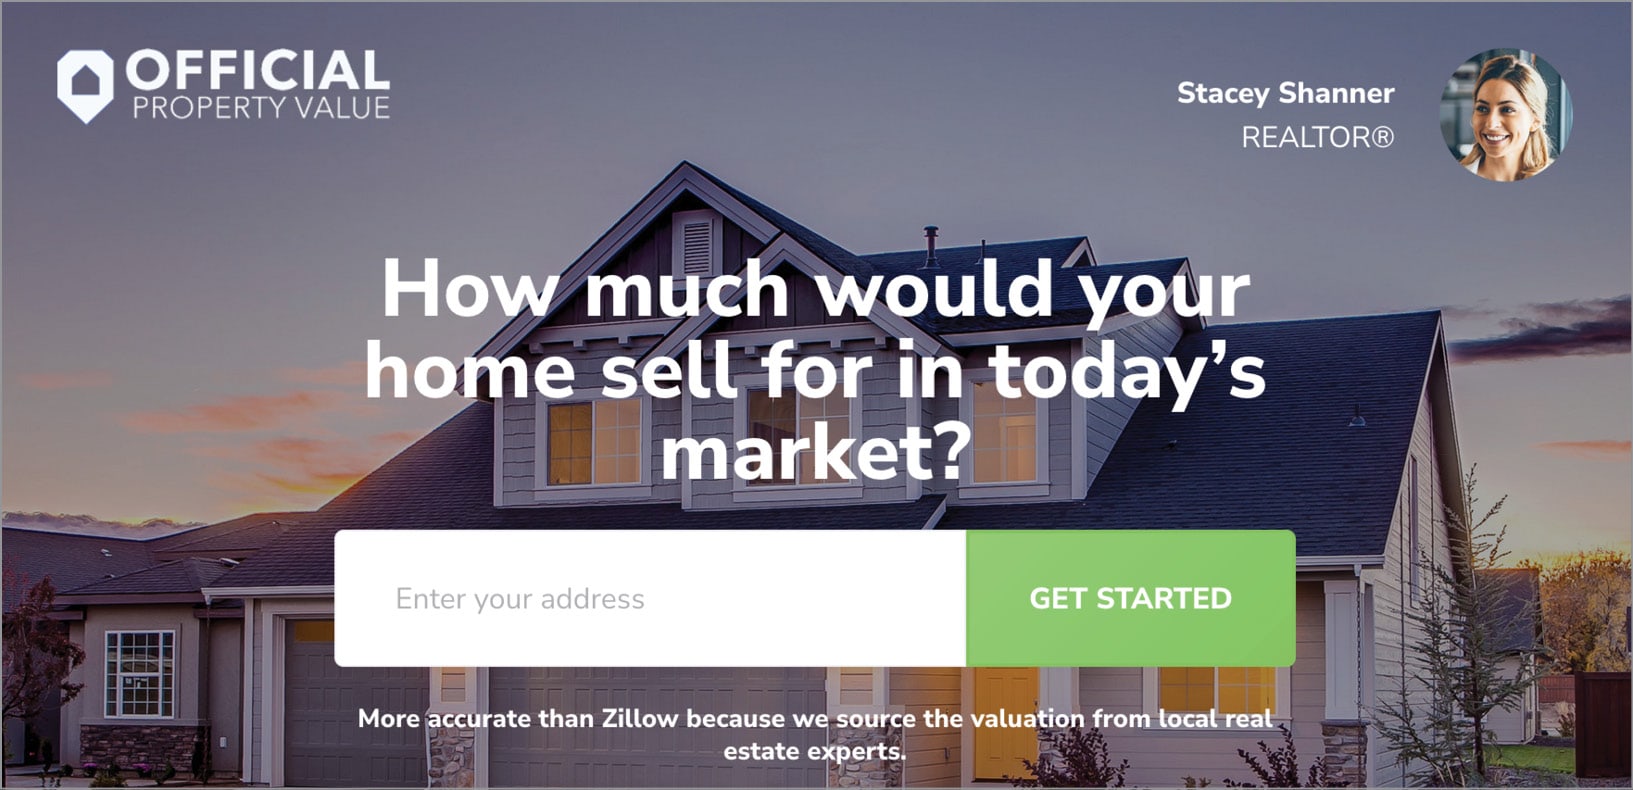 A landing page titled how much would your home sell for in today's market. Included a text field for entering an email address and a button that reads get started.